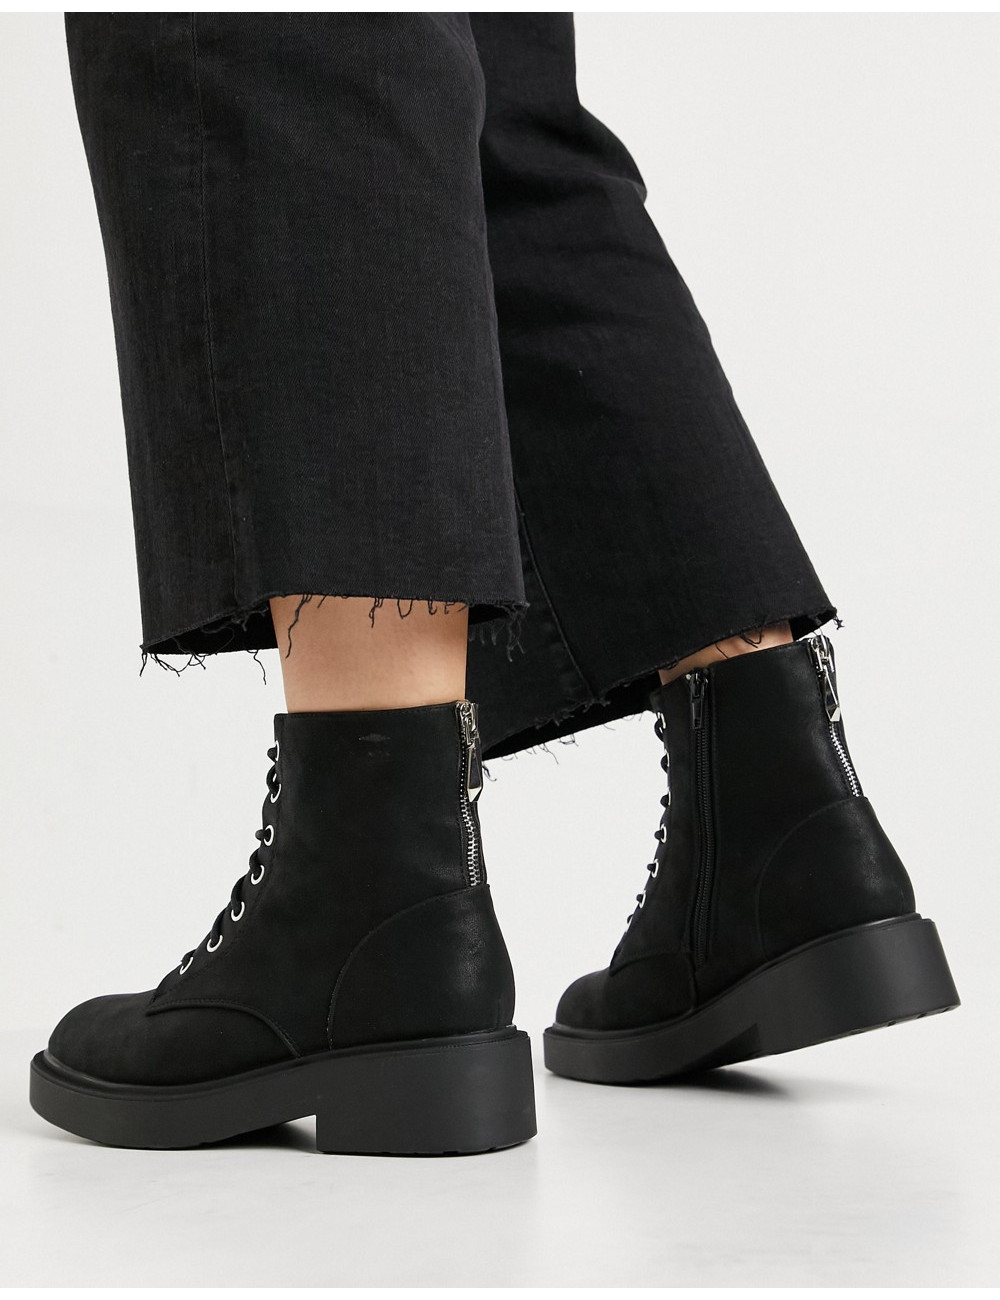 New Look lace up biker boot...